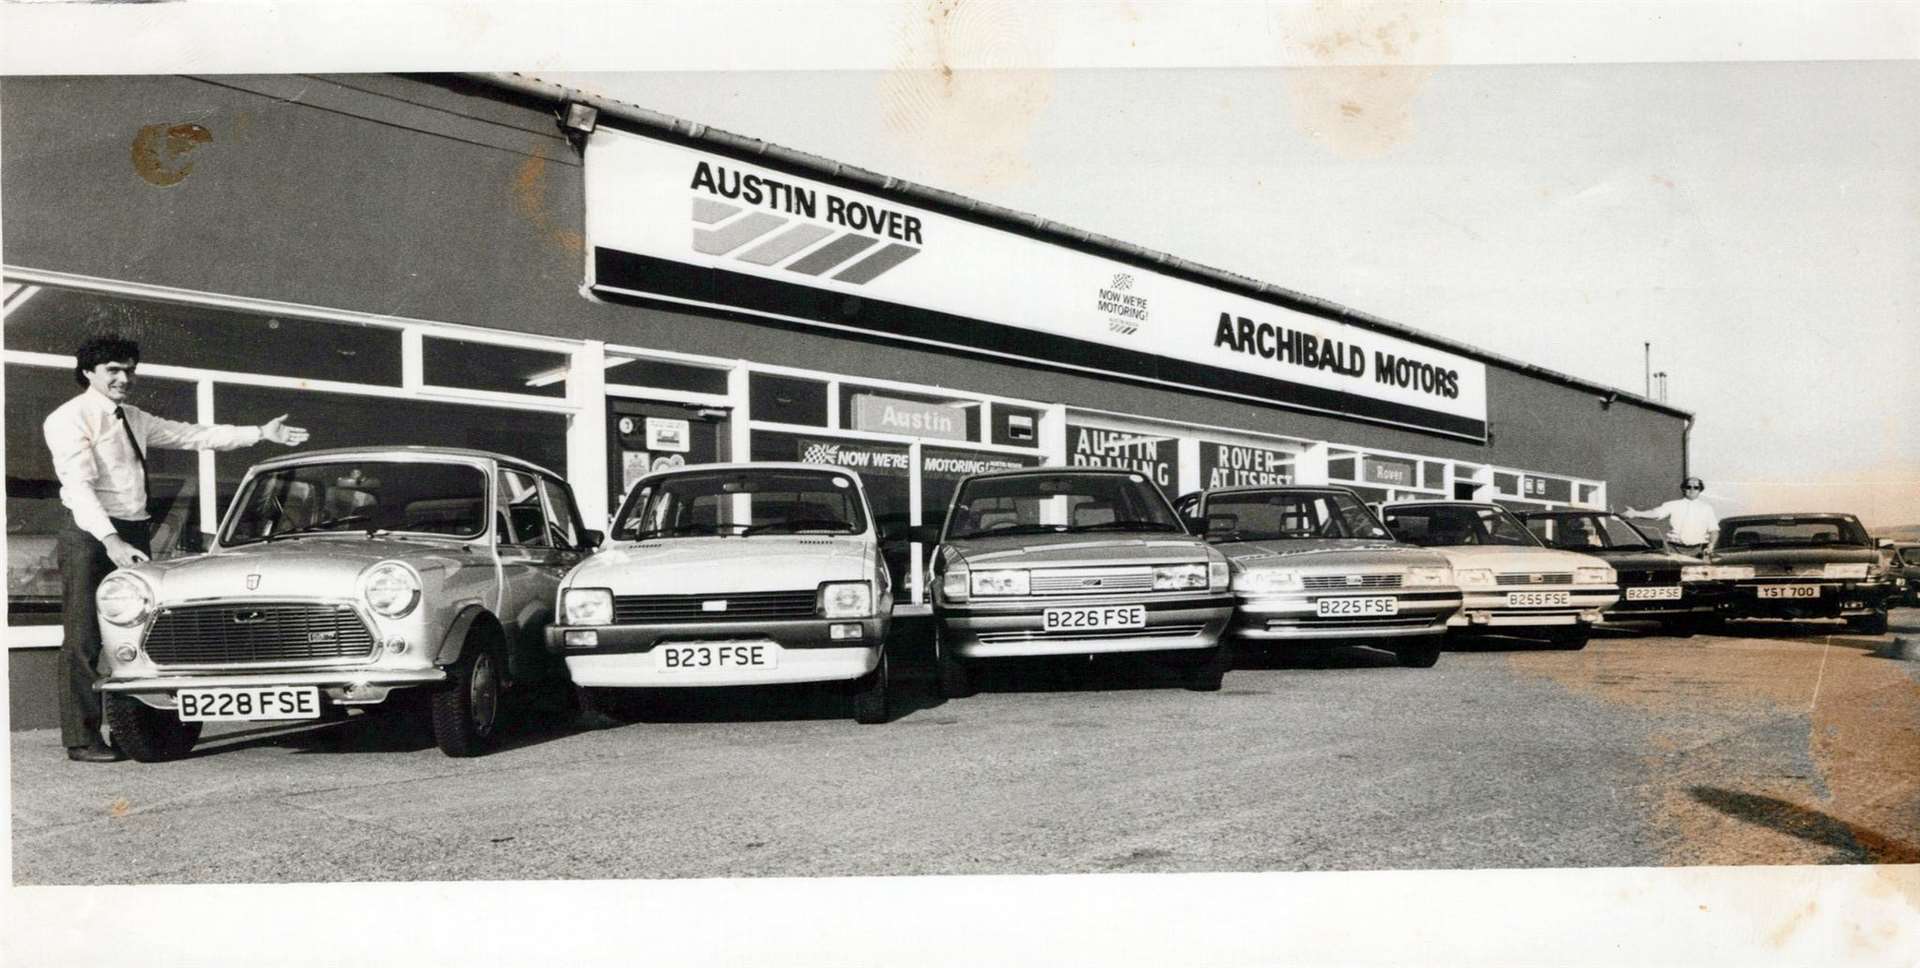 Kenny shows new August registrations in August 1984 at Archibald Motors in Buckie.